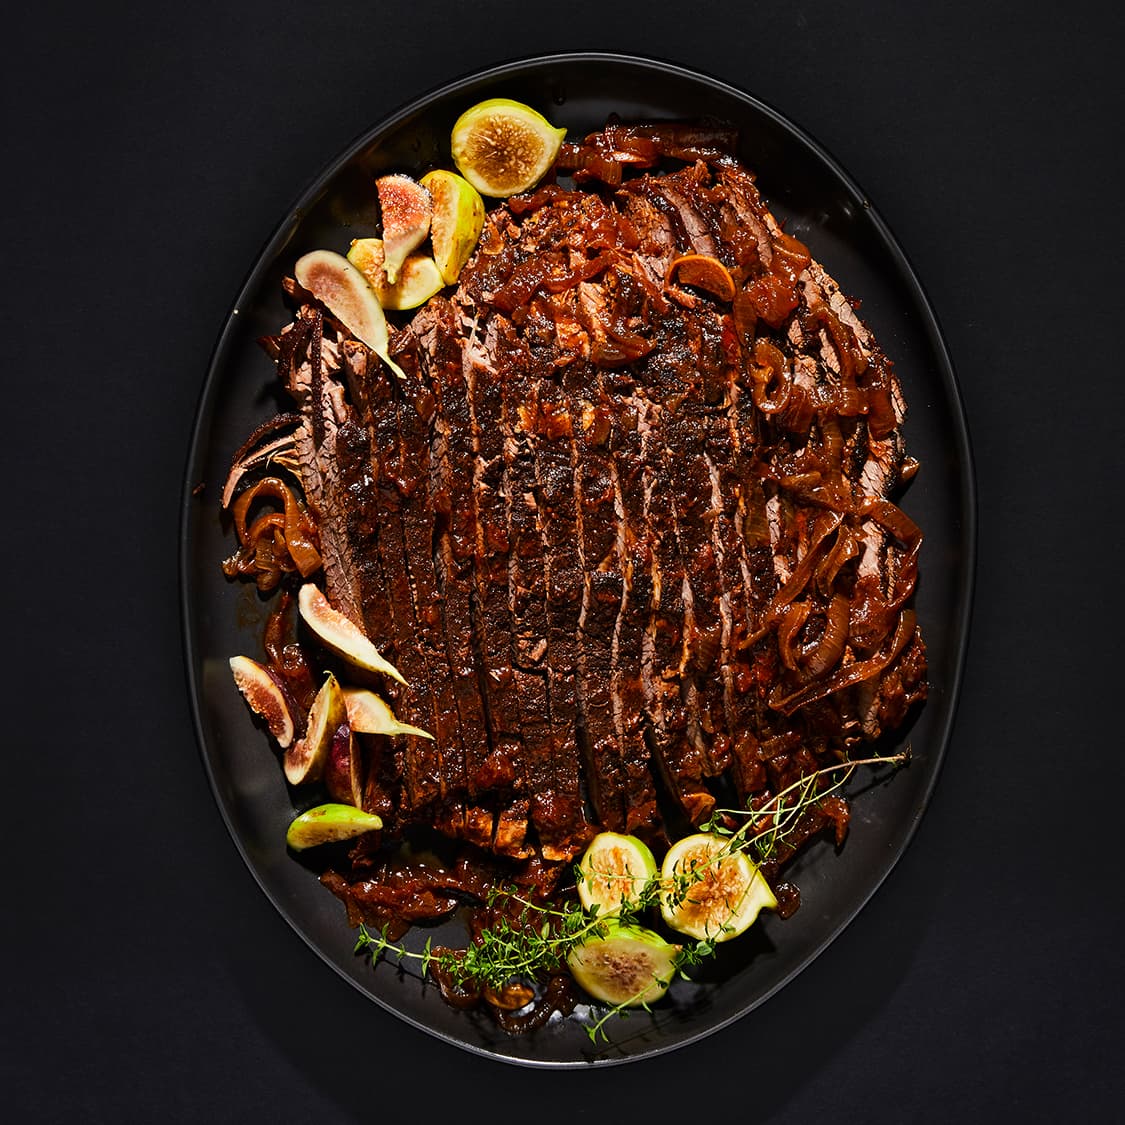 https://fleishigs.com/images/mobile-app/recipes/1328-list-baharat-and-fig-braised-top-of-the-rib.jpg